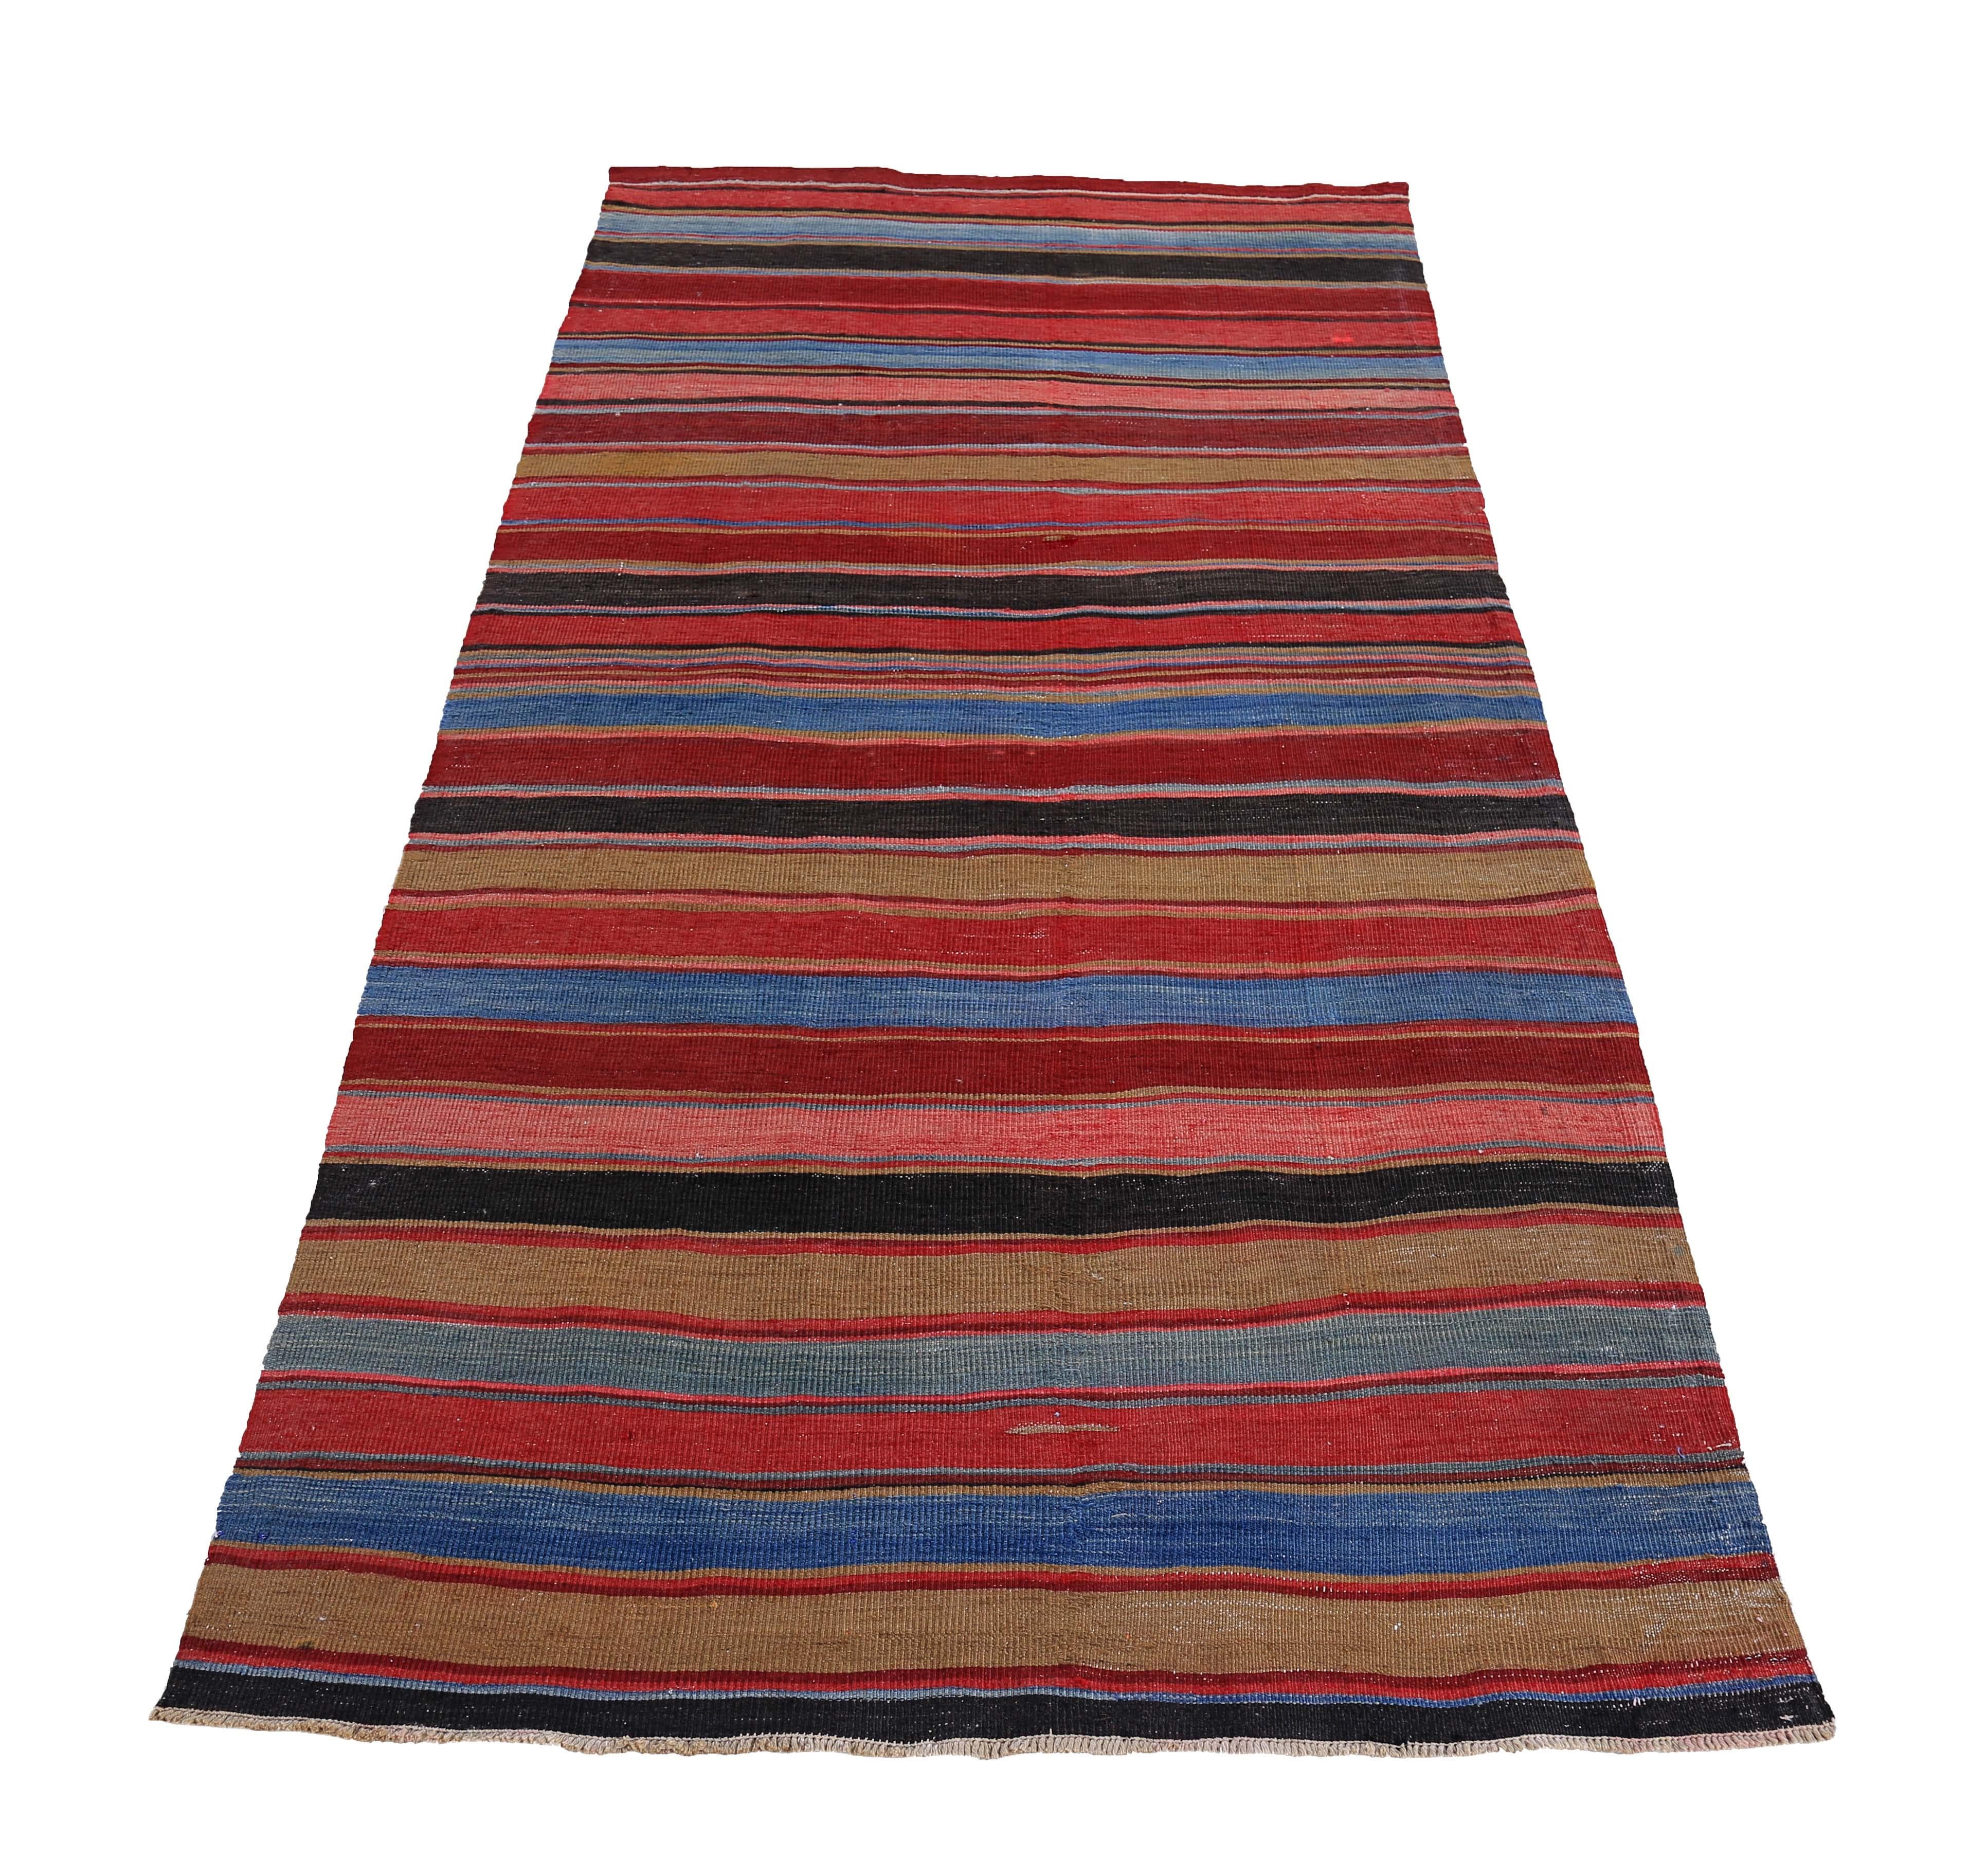 Turkish rug handwoven from the finest sheep’s wool and colored with all-natural vegetable dyes that are safe for humans and pets. It’s a traditional Kilim flat-weave design featuring red, pink and blue stripes. It’s a stunning piece to get for